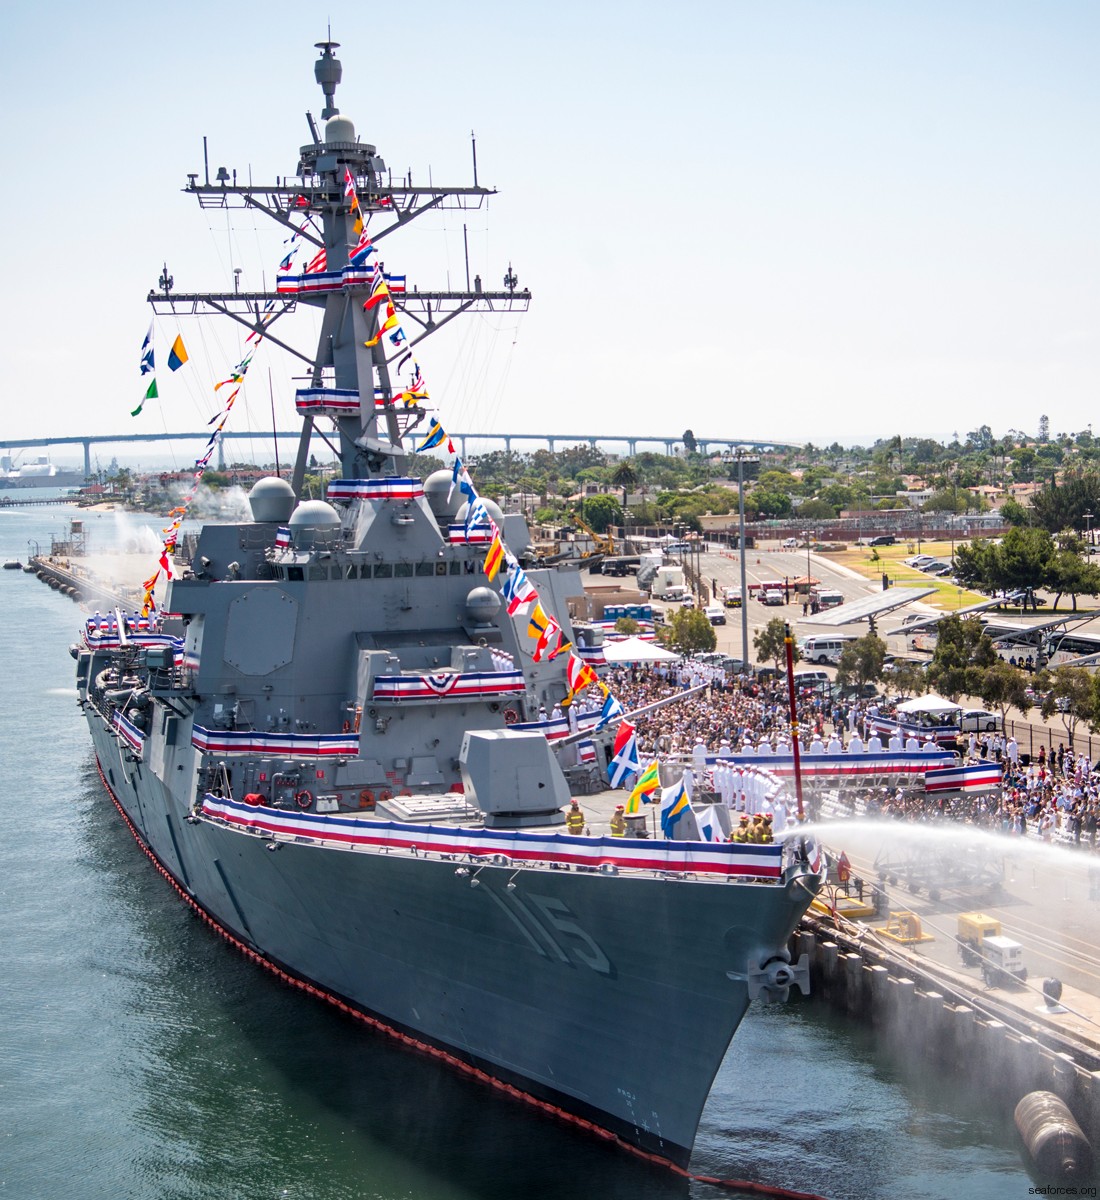 ddg-115 uss rafael peralta arleigh burke class guided missile destroyer us navy aegis 04 commissioning